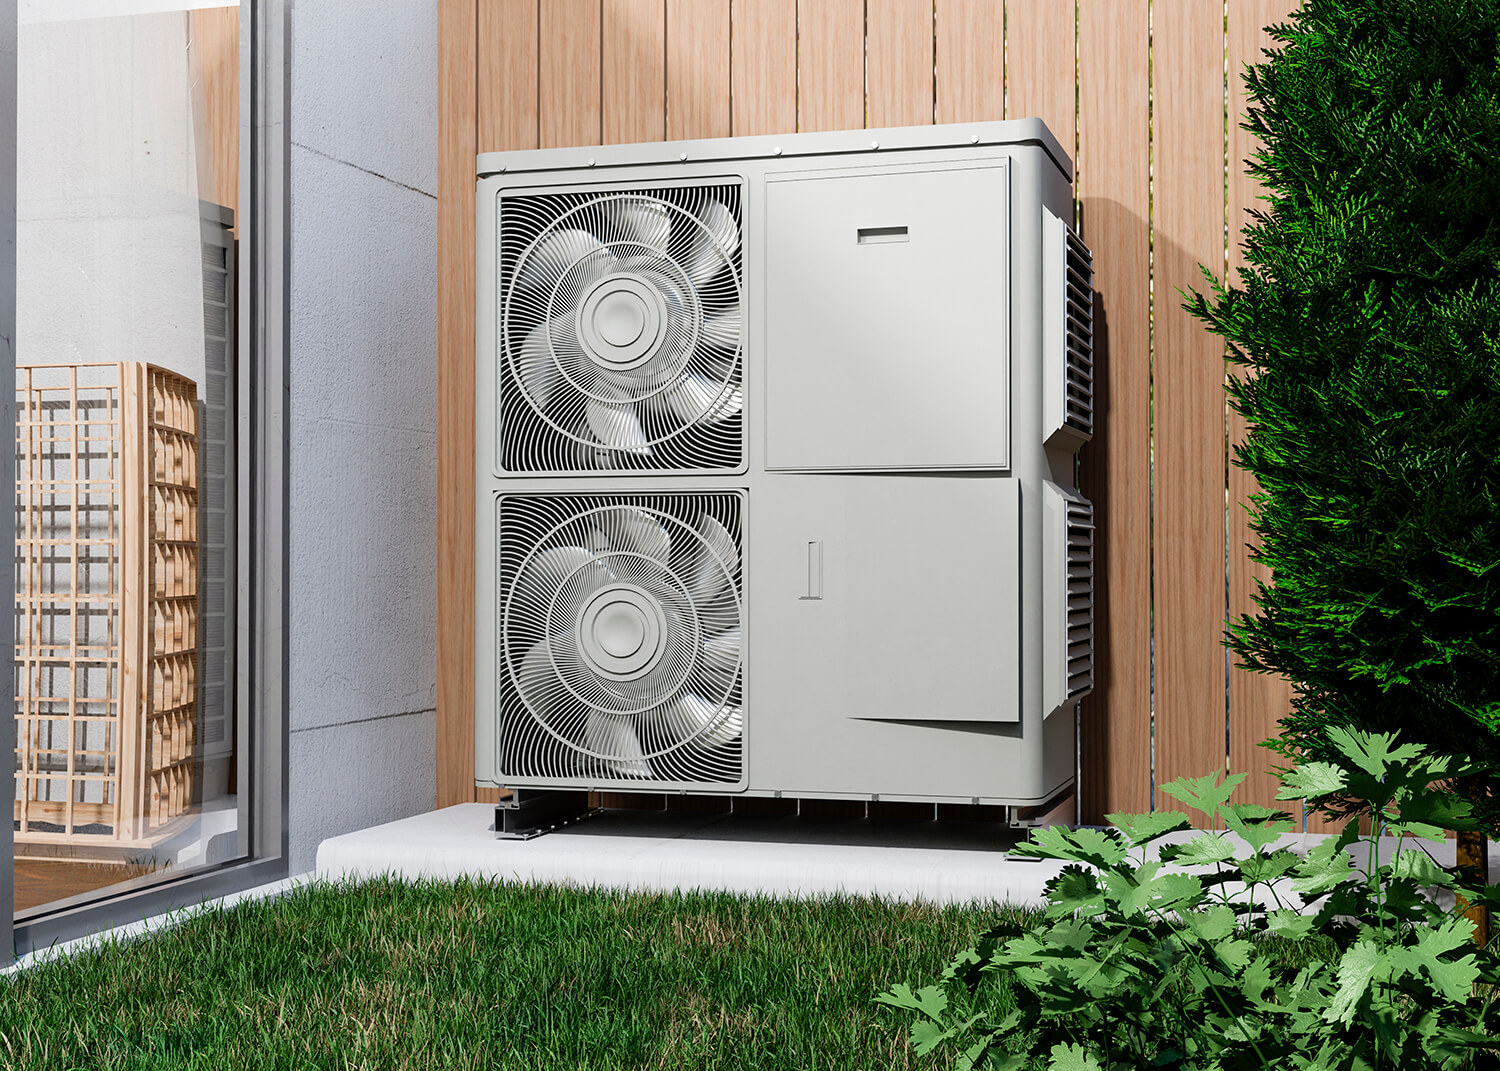 Zone controlled Heating as well as A/C is the key to a long marriage